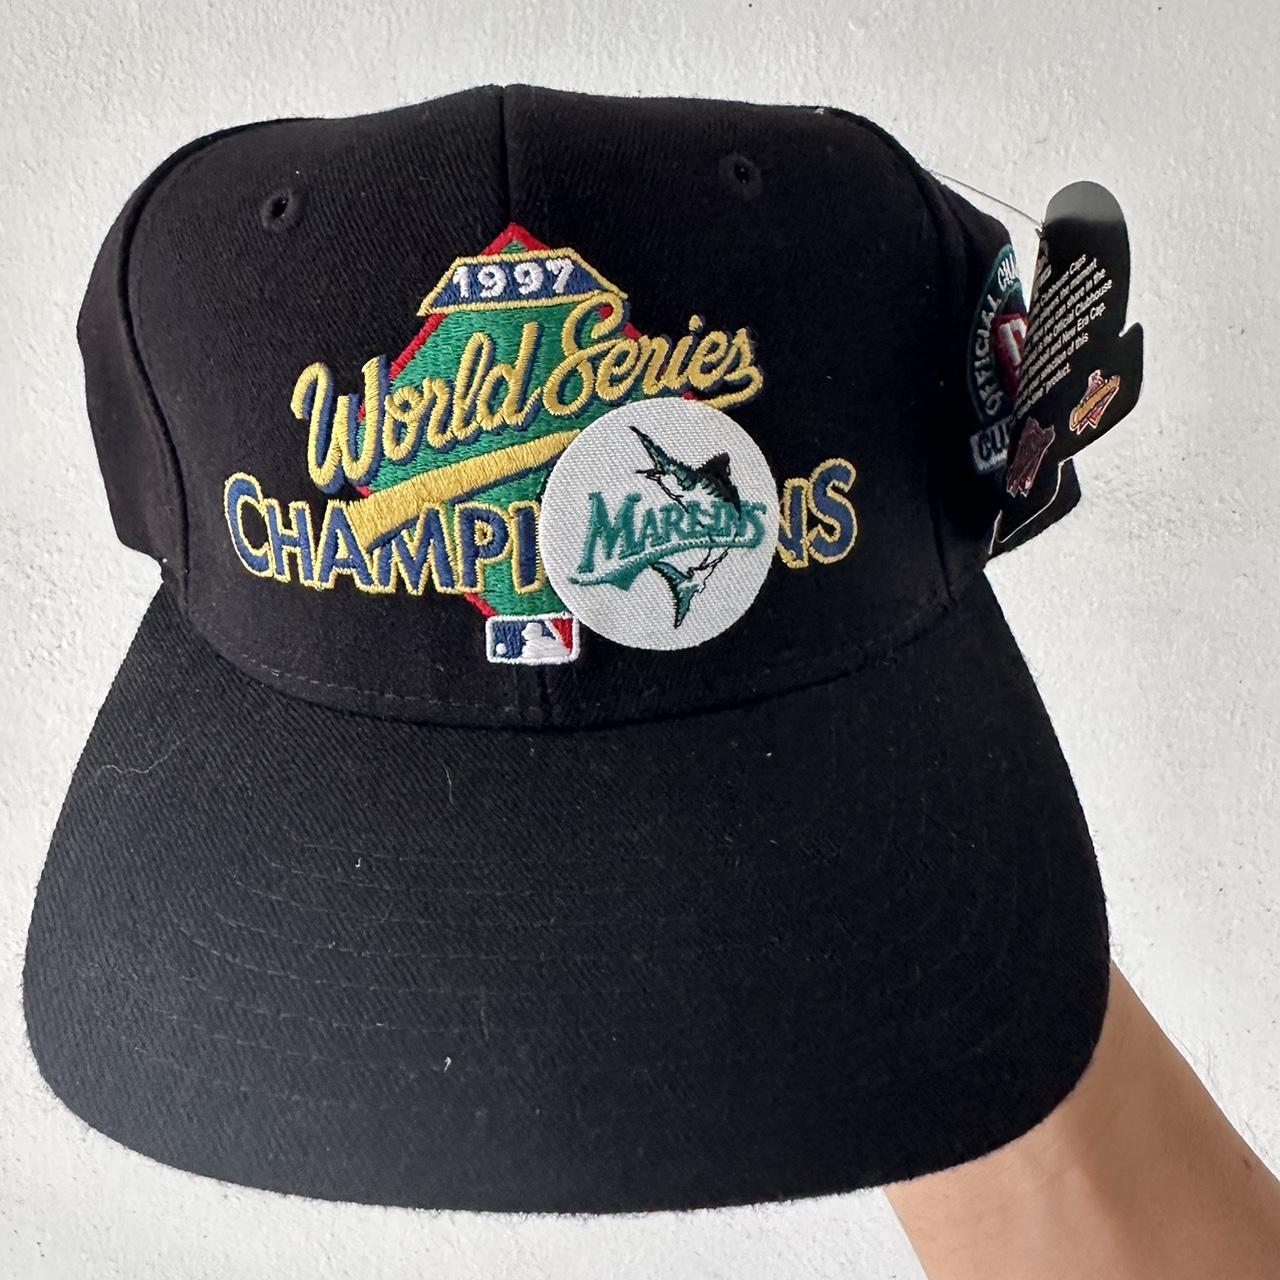 New Era 1997 Florida Marlins World Series Champions Official Clubhouse Cap  Hat